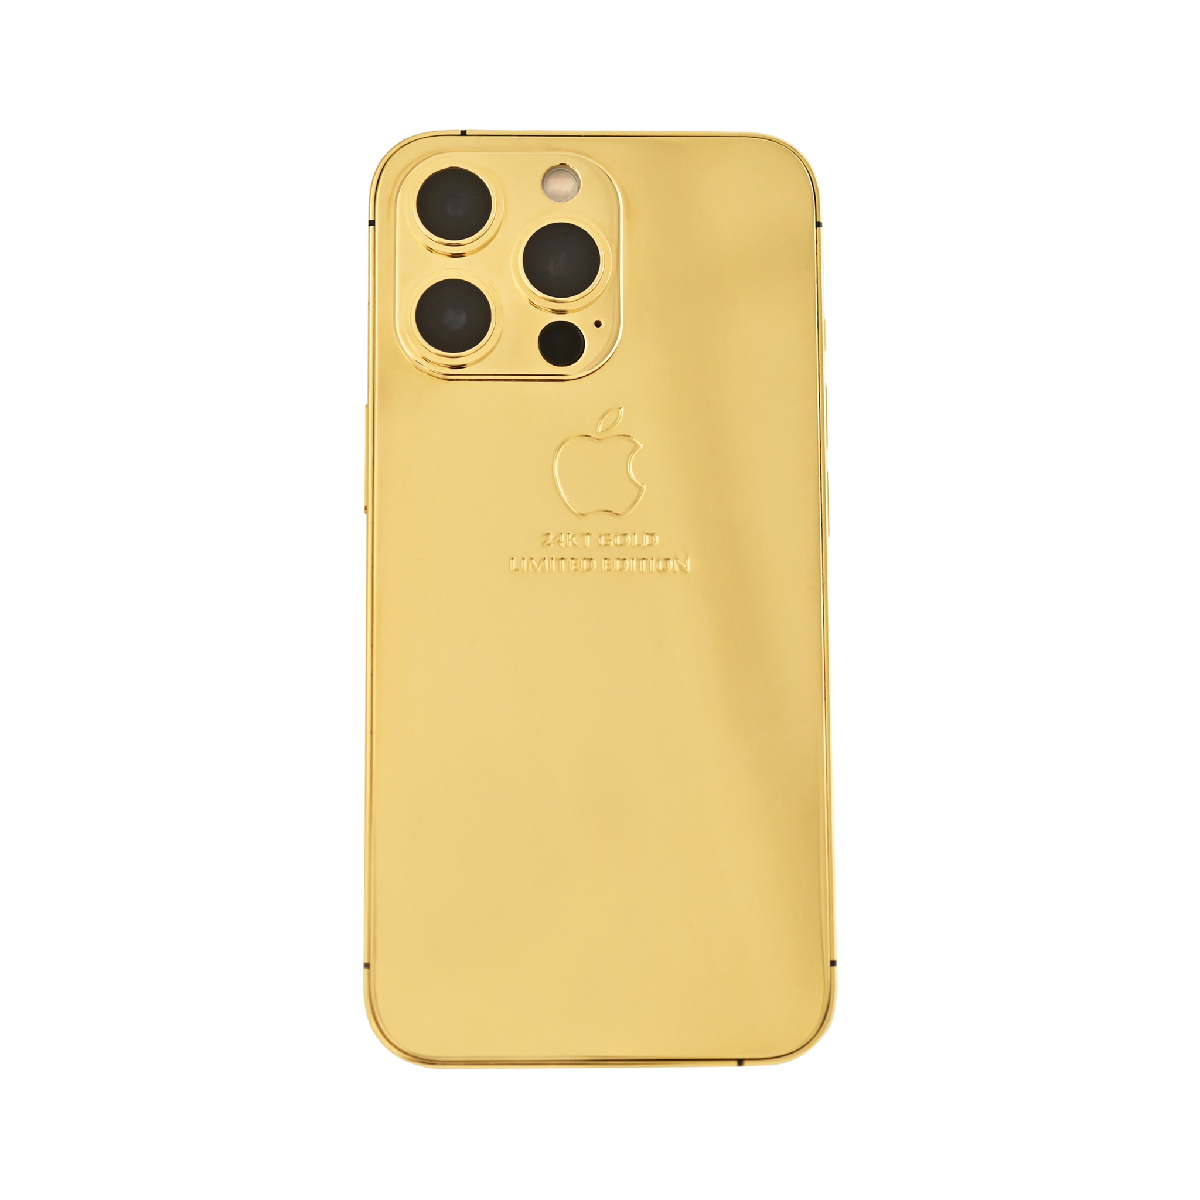 Caviar Luxury 24k Full Gold Customized iPhone 14 Pro Max 1 TB Limited Edition